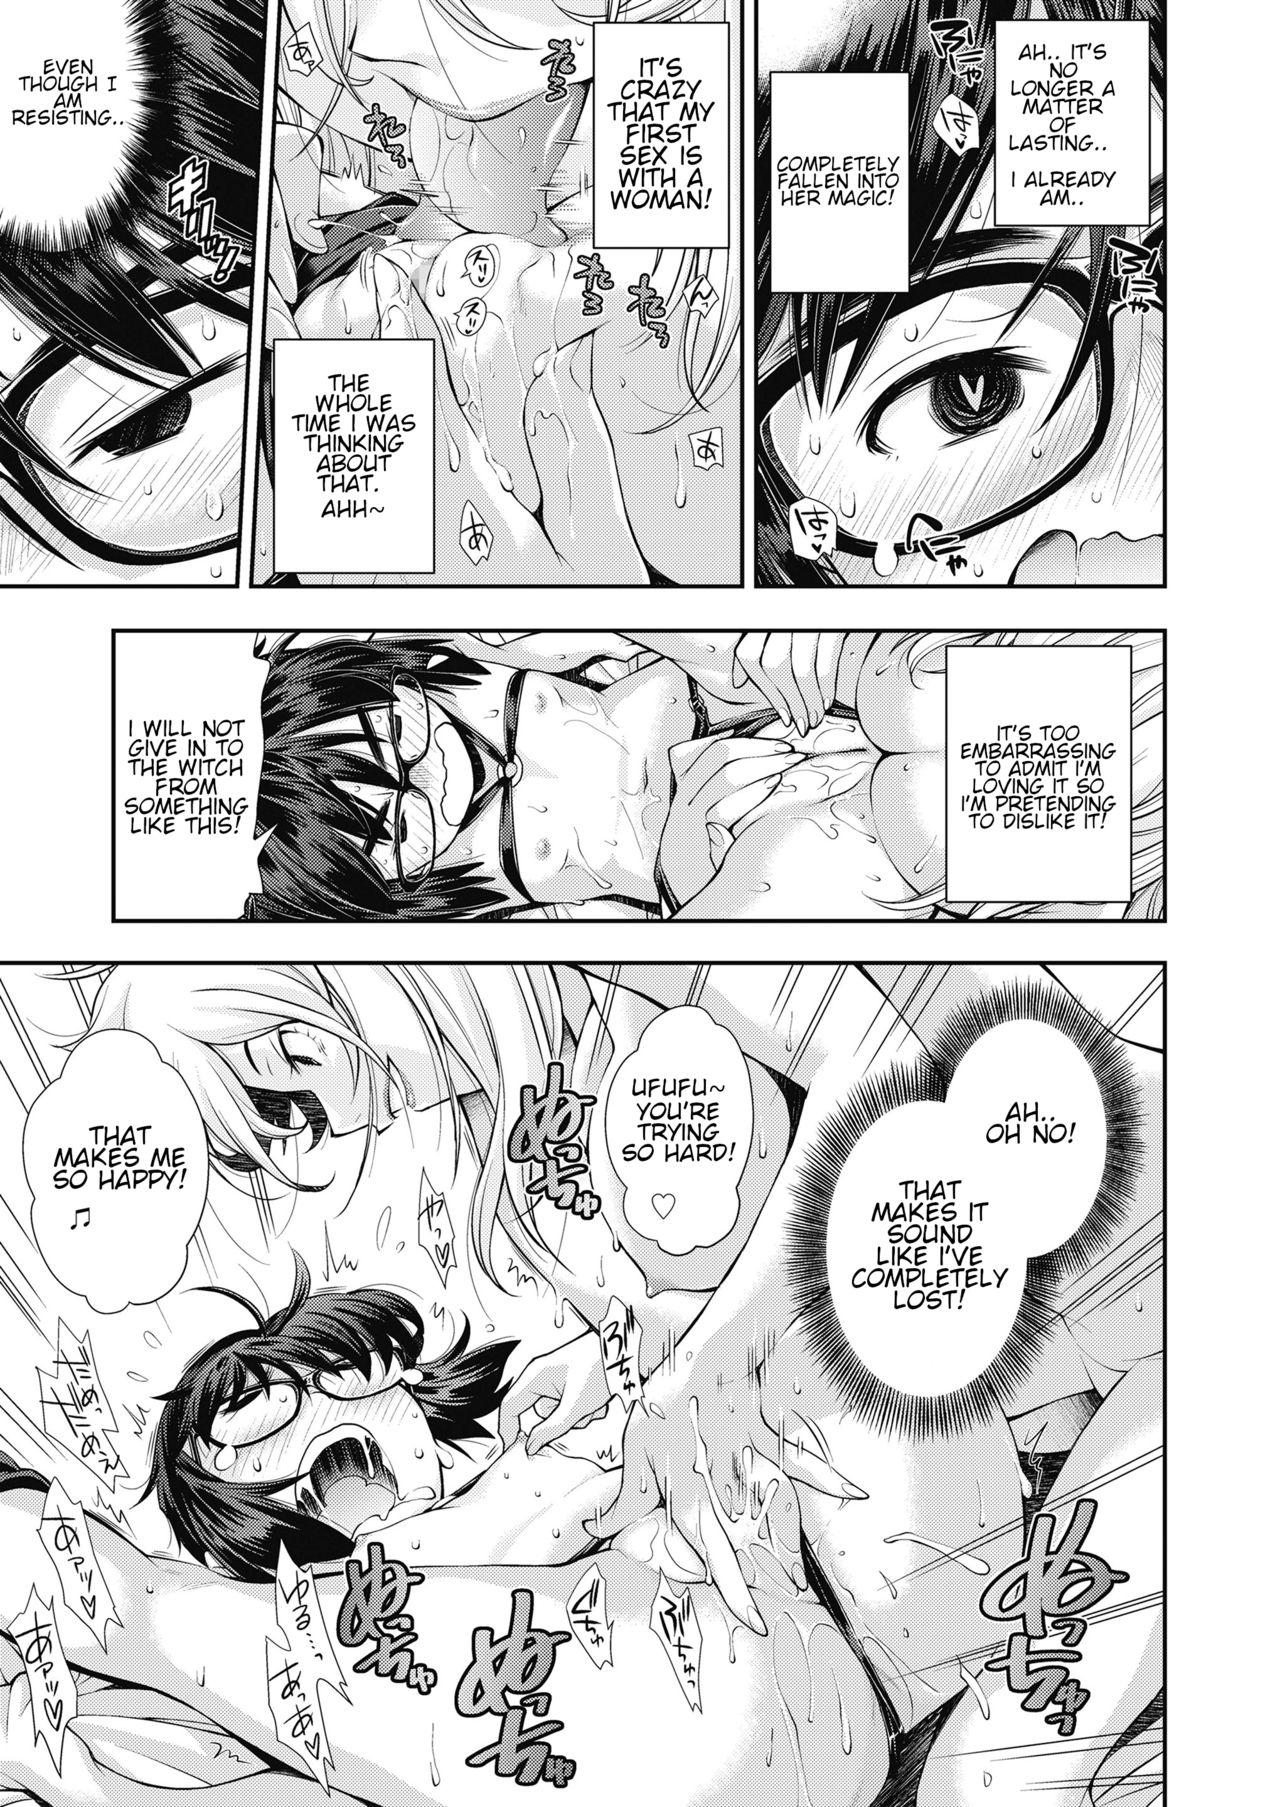 T Girl Manken JC Isekai de Yuusha ni Naru mo Les to Shokushu ni Otsu | I became a brave loli warrior in another world but fell prey to a lesbian and tentacles Amature - Page 11